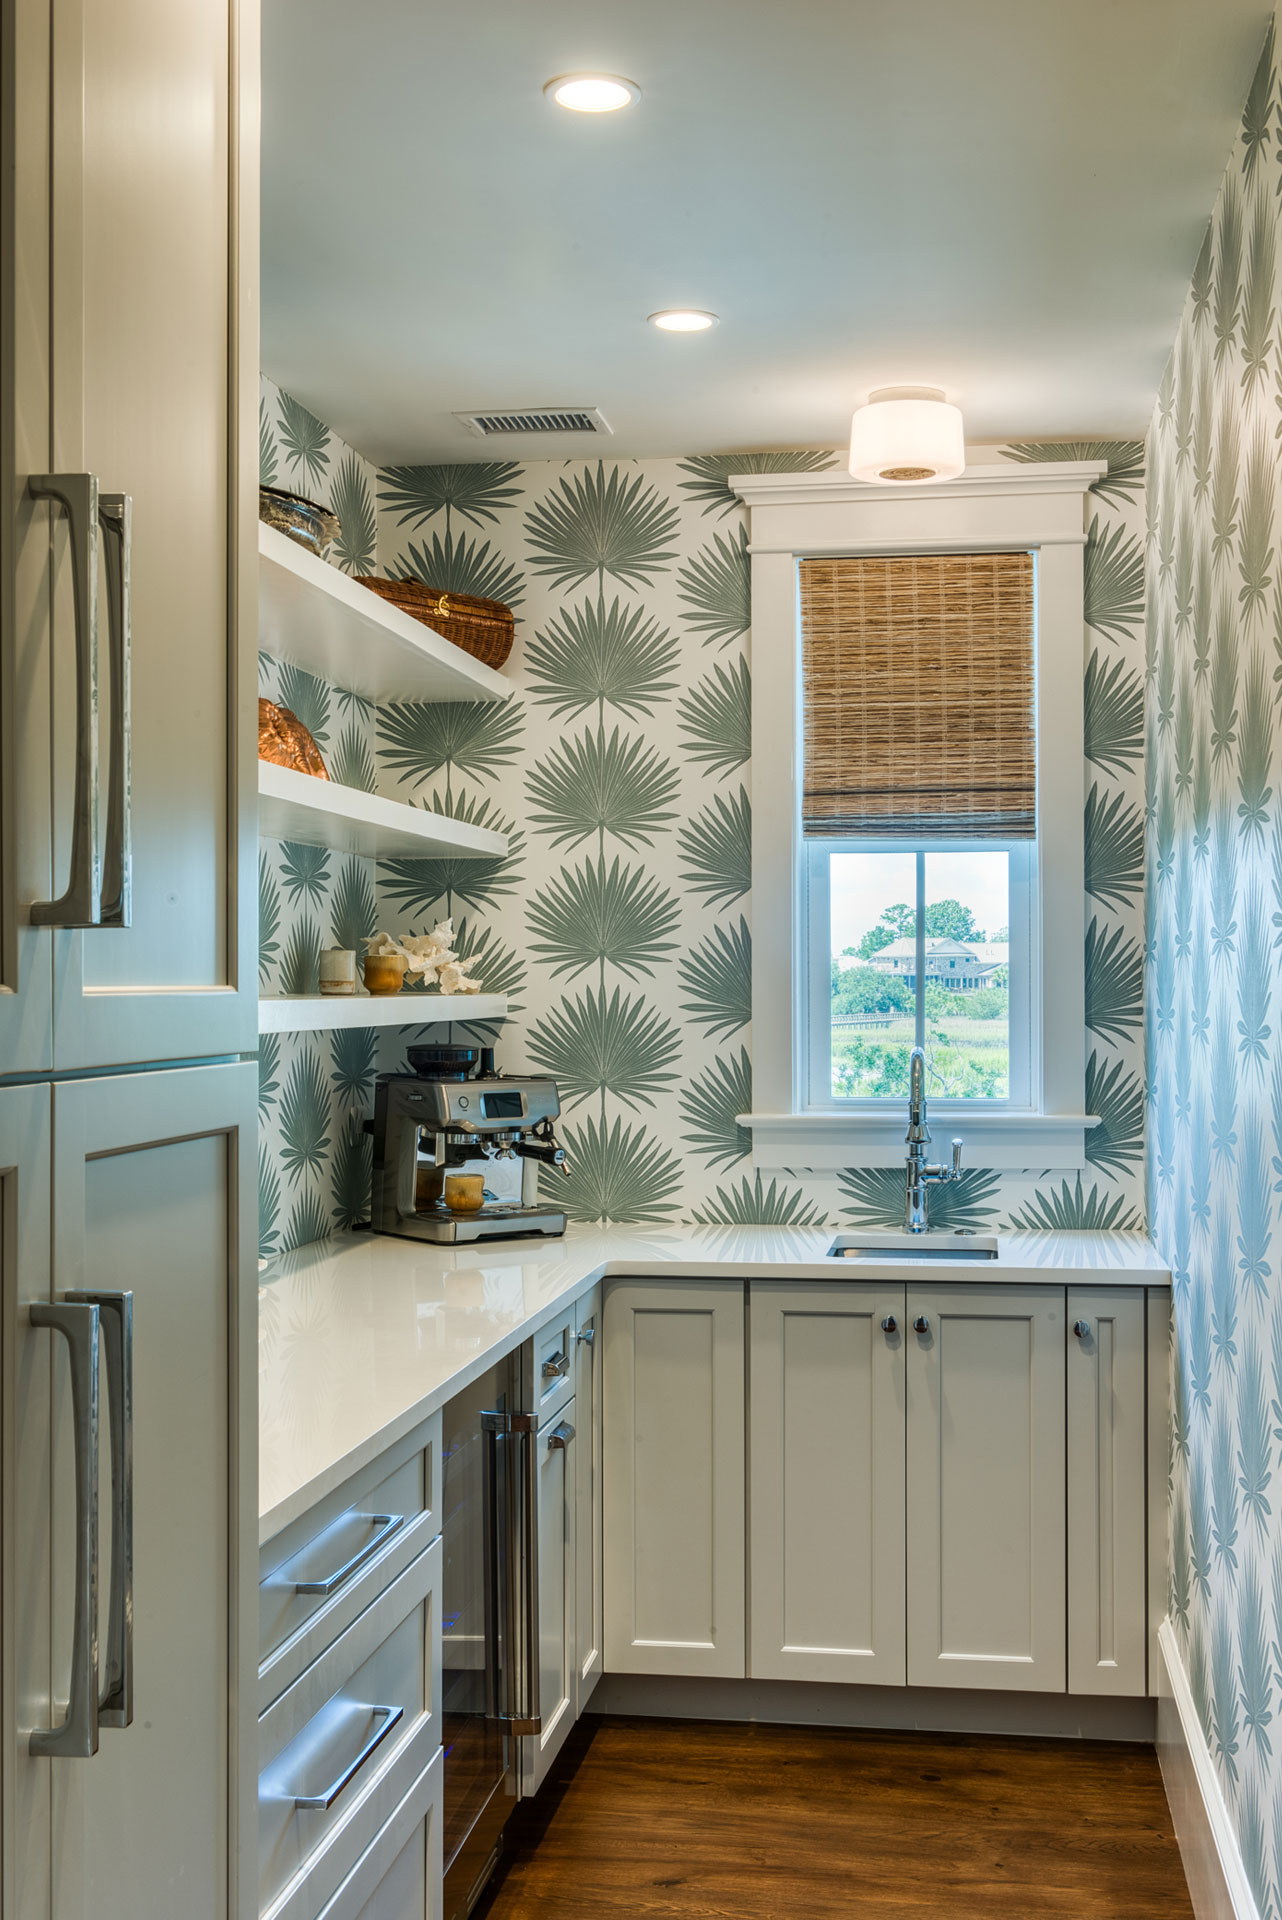 Walk-in butler's pantry off main kitchen with bold wallpaper and custom cabinets